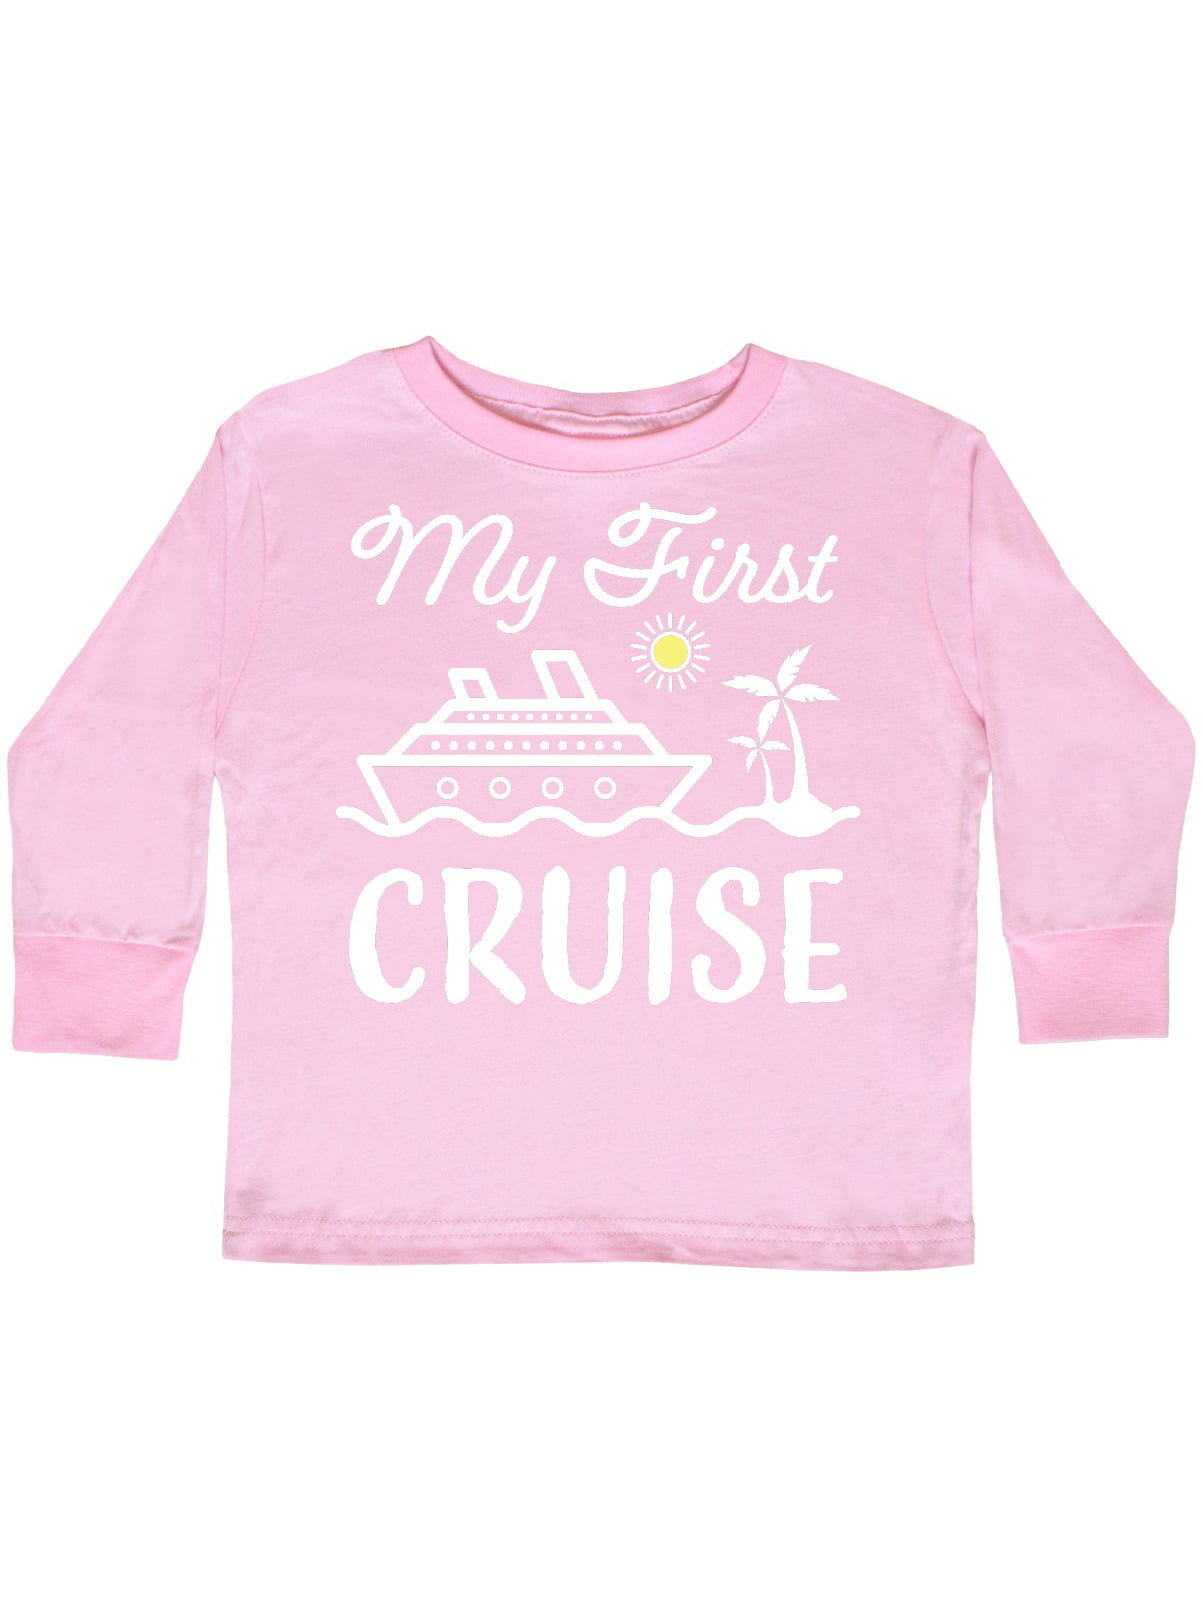 Im Going On A Cruise with My Pawpaw Toddler/Kids Raglan T-Shirt Pack My Stuff 